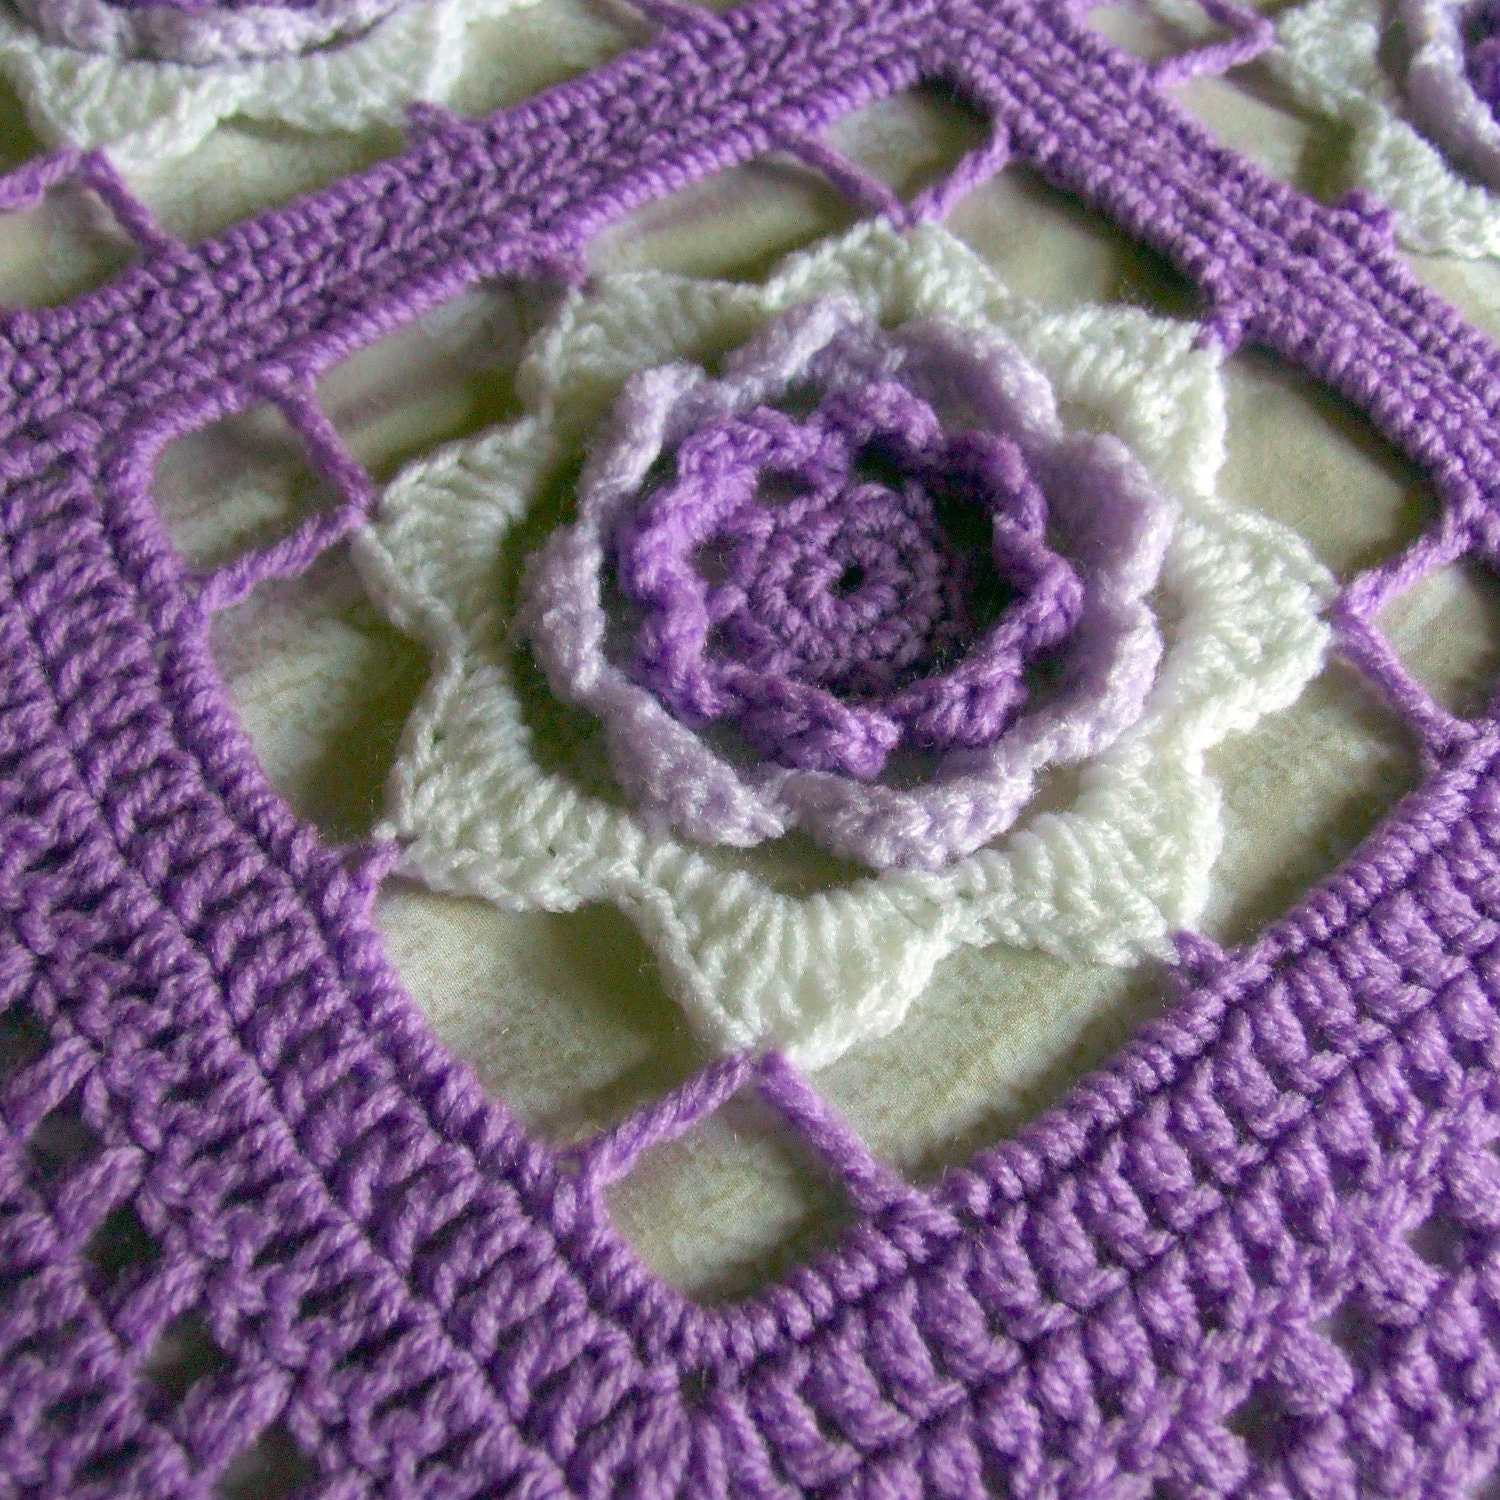 Crochet Afghan Patterns and Booklets - Shady Lane Original Crochet